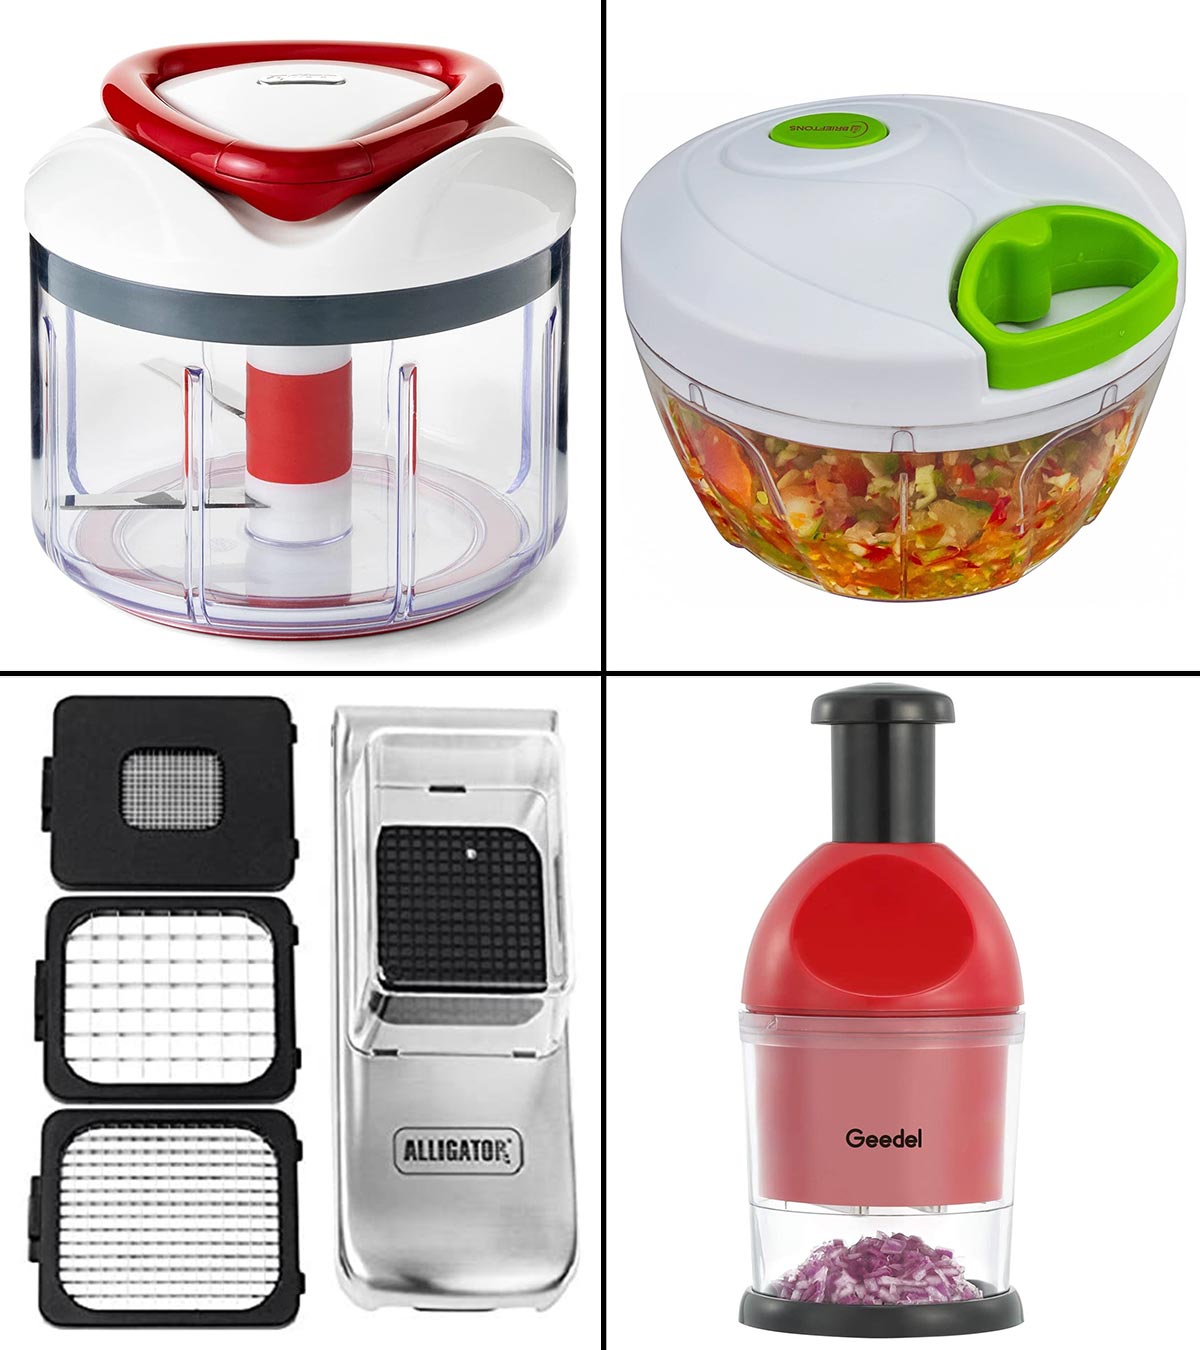 Portable and Manual Vegetable Chopper - Round, Compact, Green